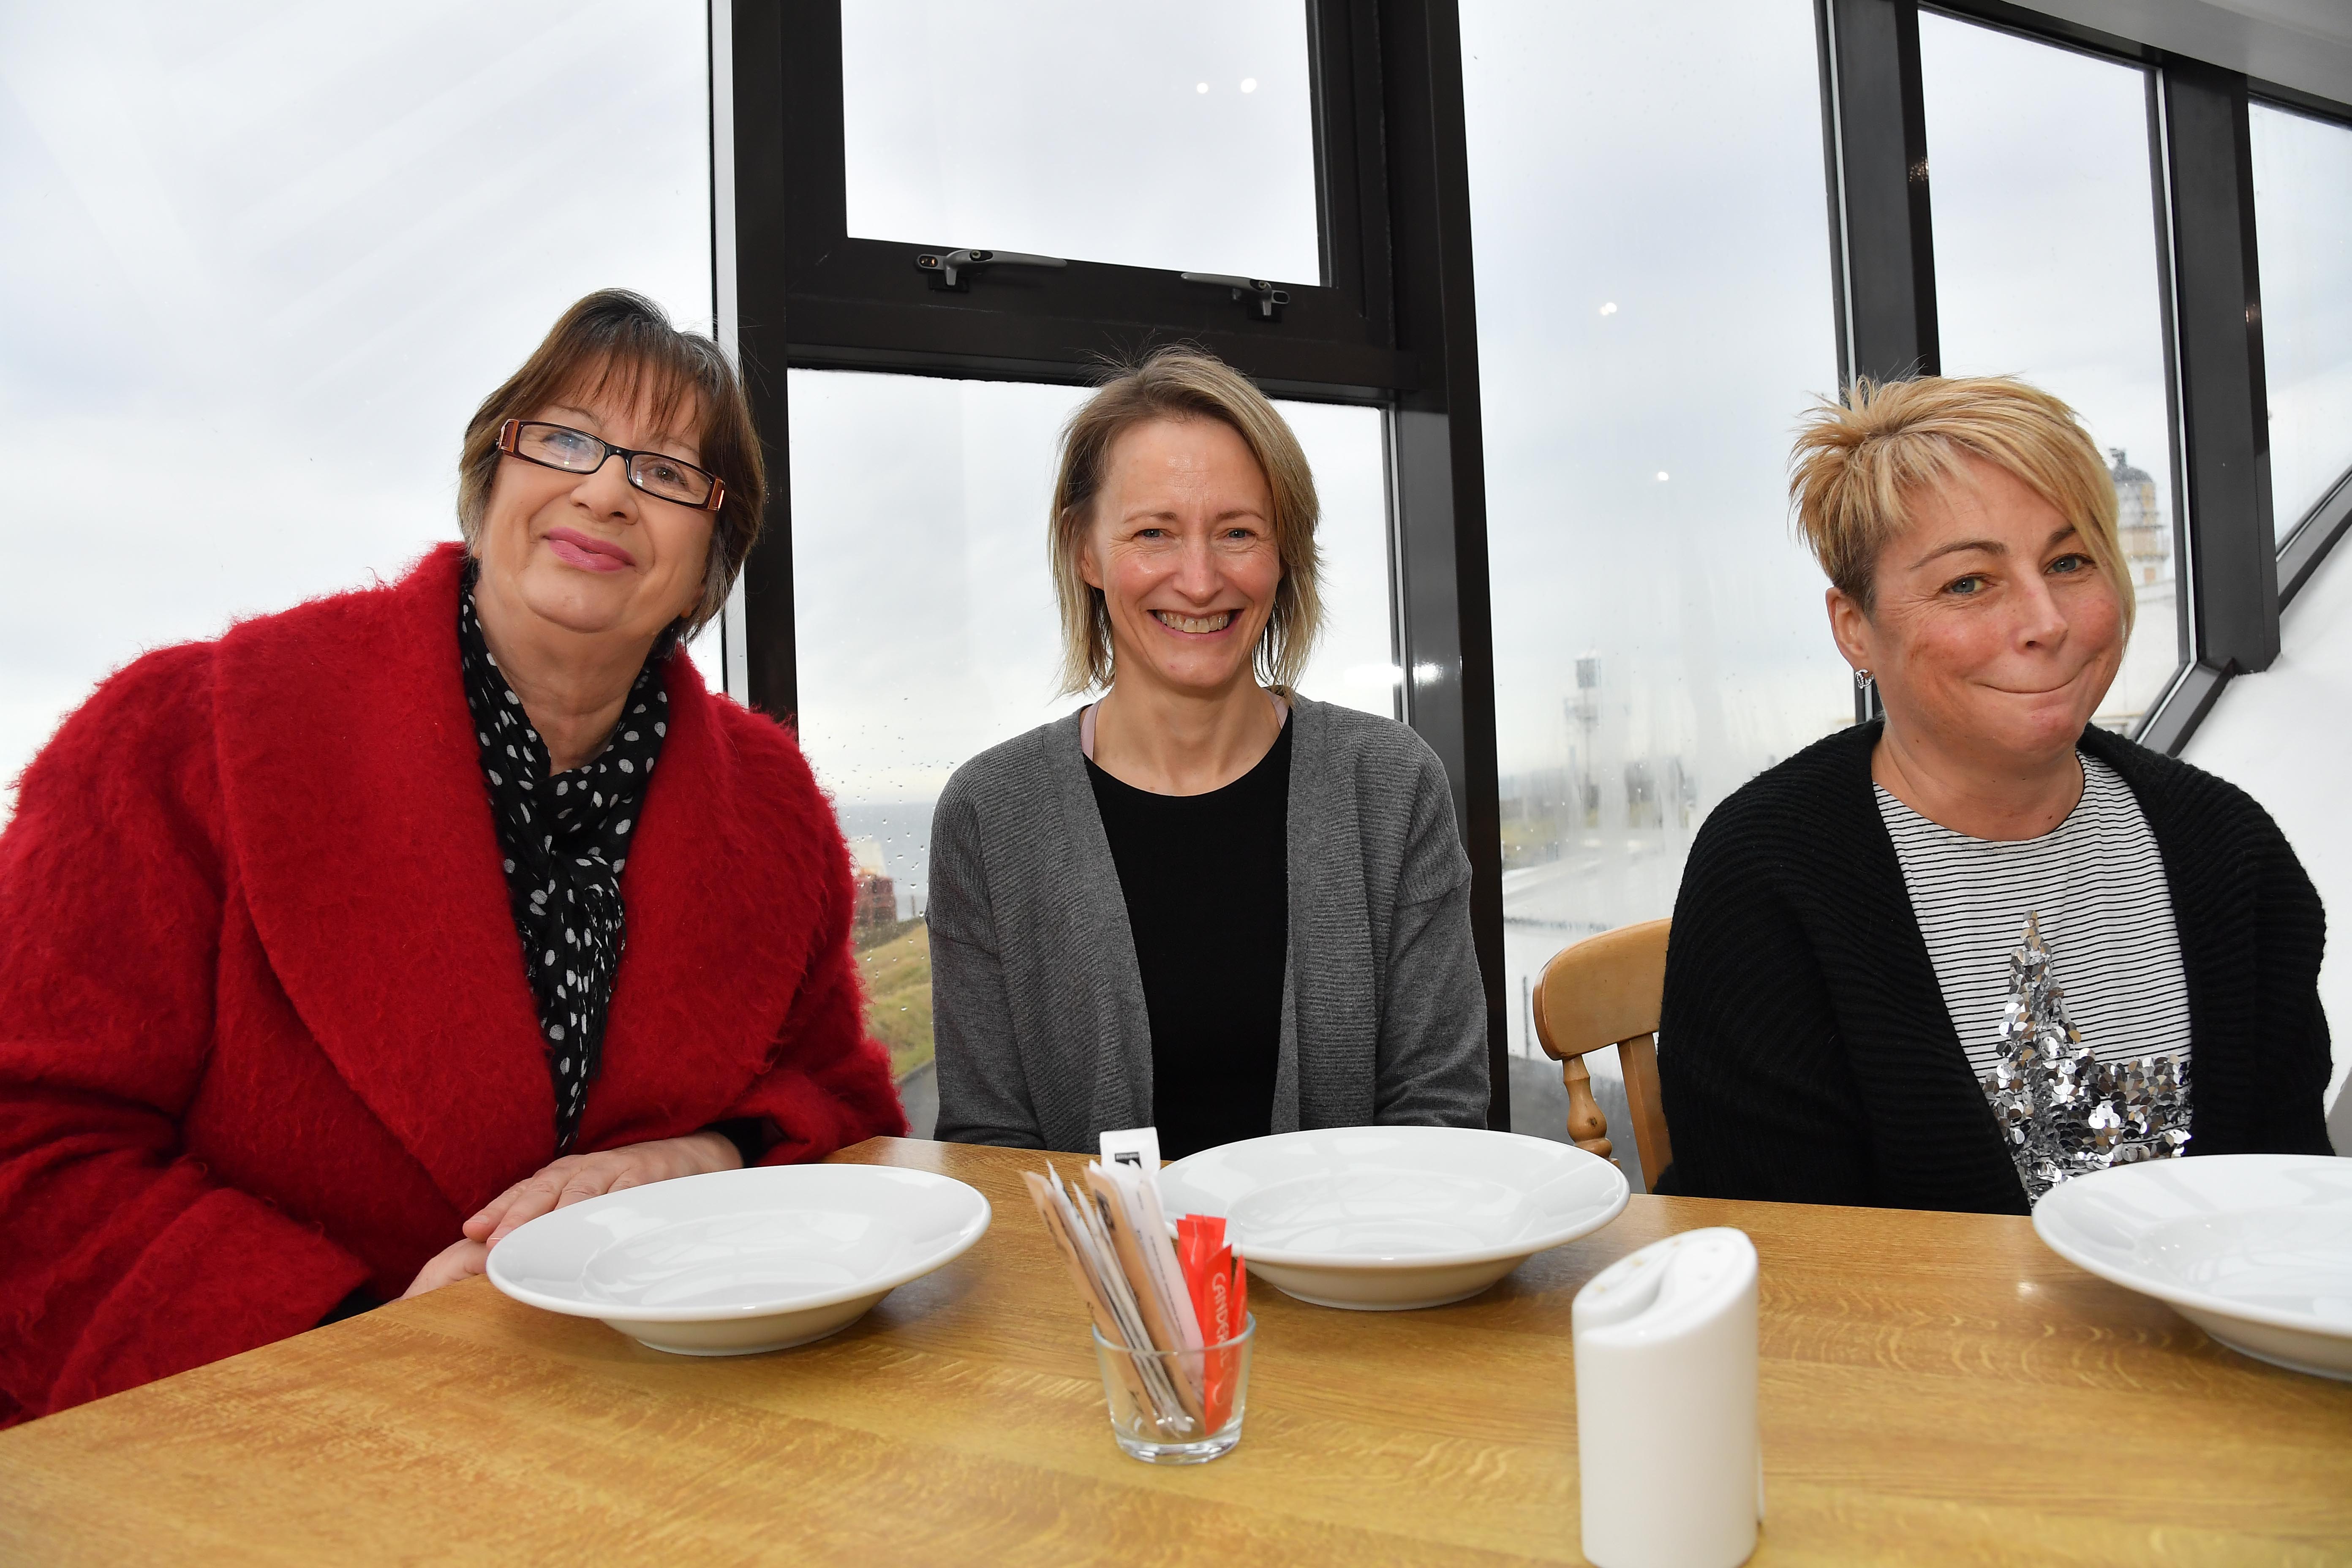 Lighthouse museum manager Lynda McGuigan (L) with Broch Soup organisers Pamela Neri and Tracey Buchan.